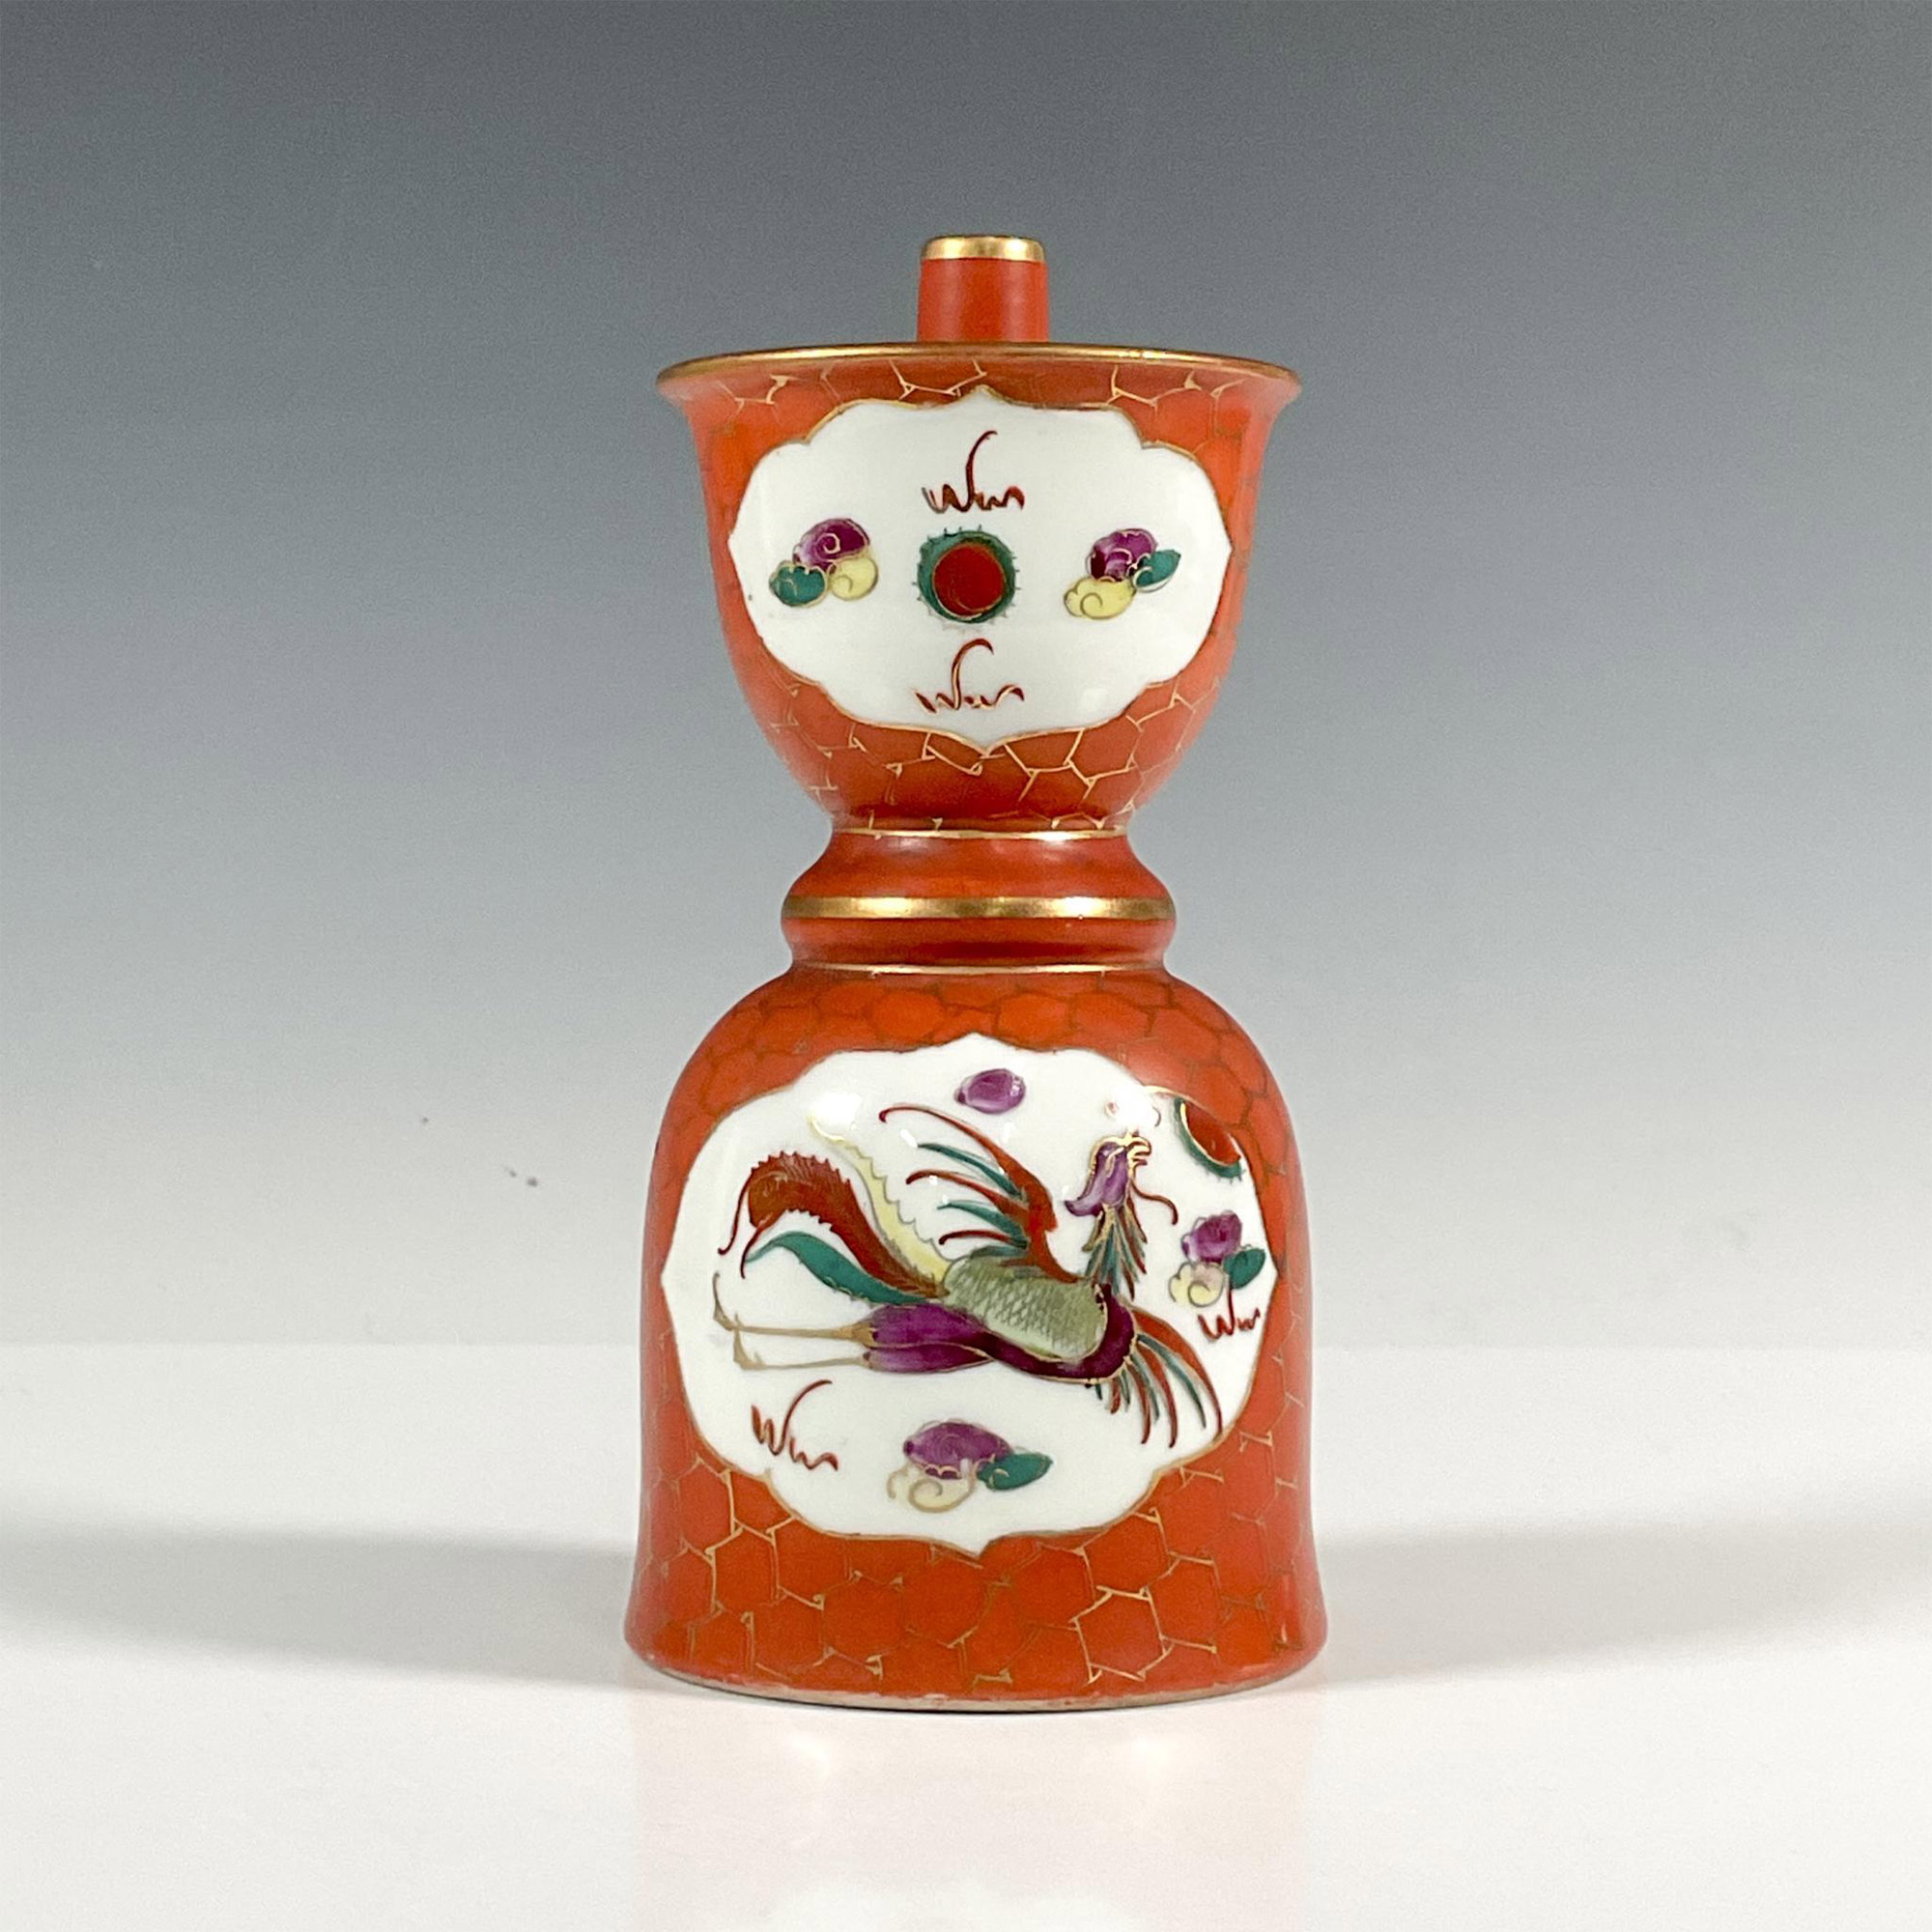 Chinese Porcelain Phoenix and Dragon Candle Holder - Image 2 of 4